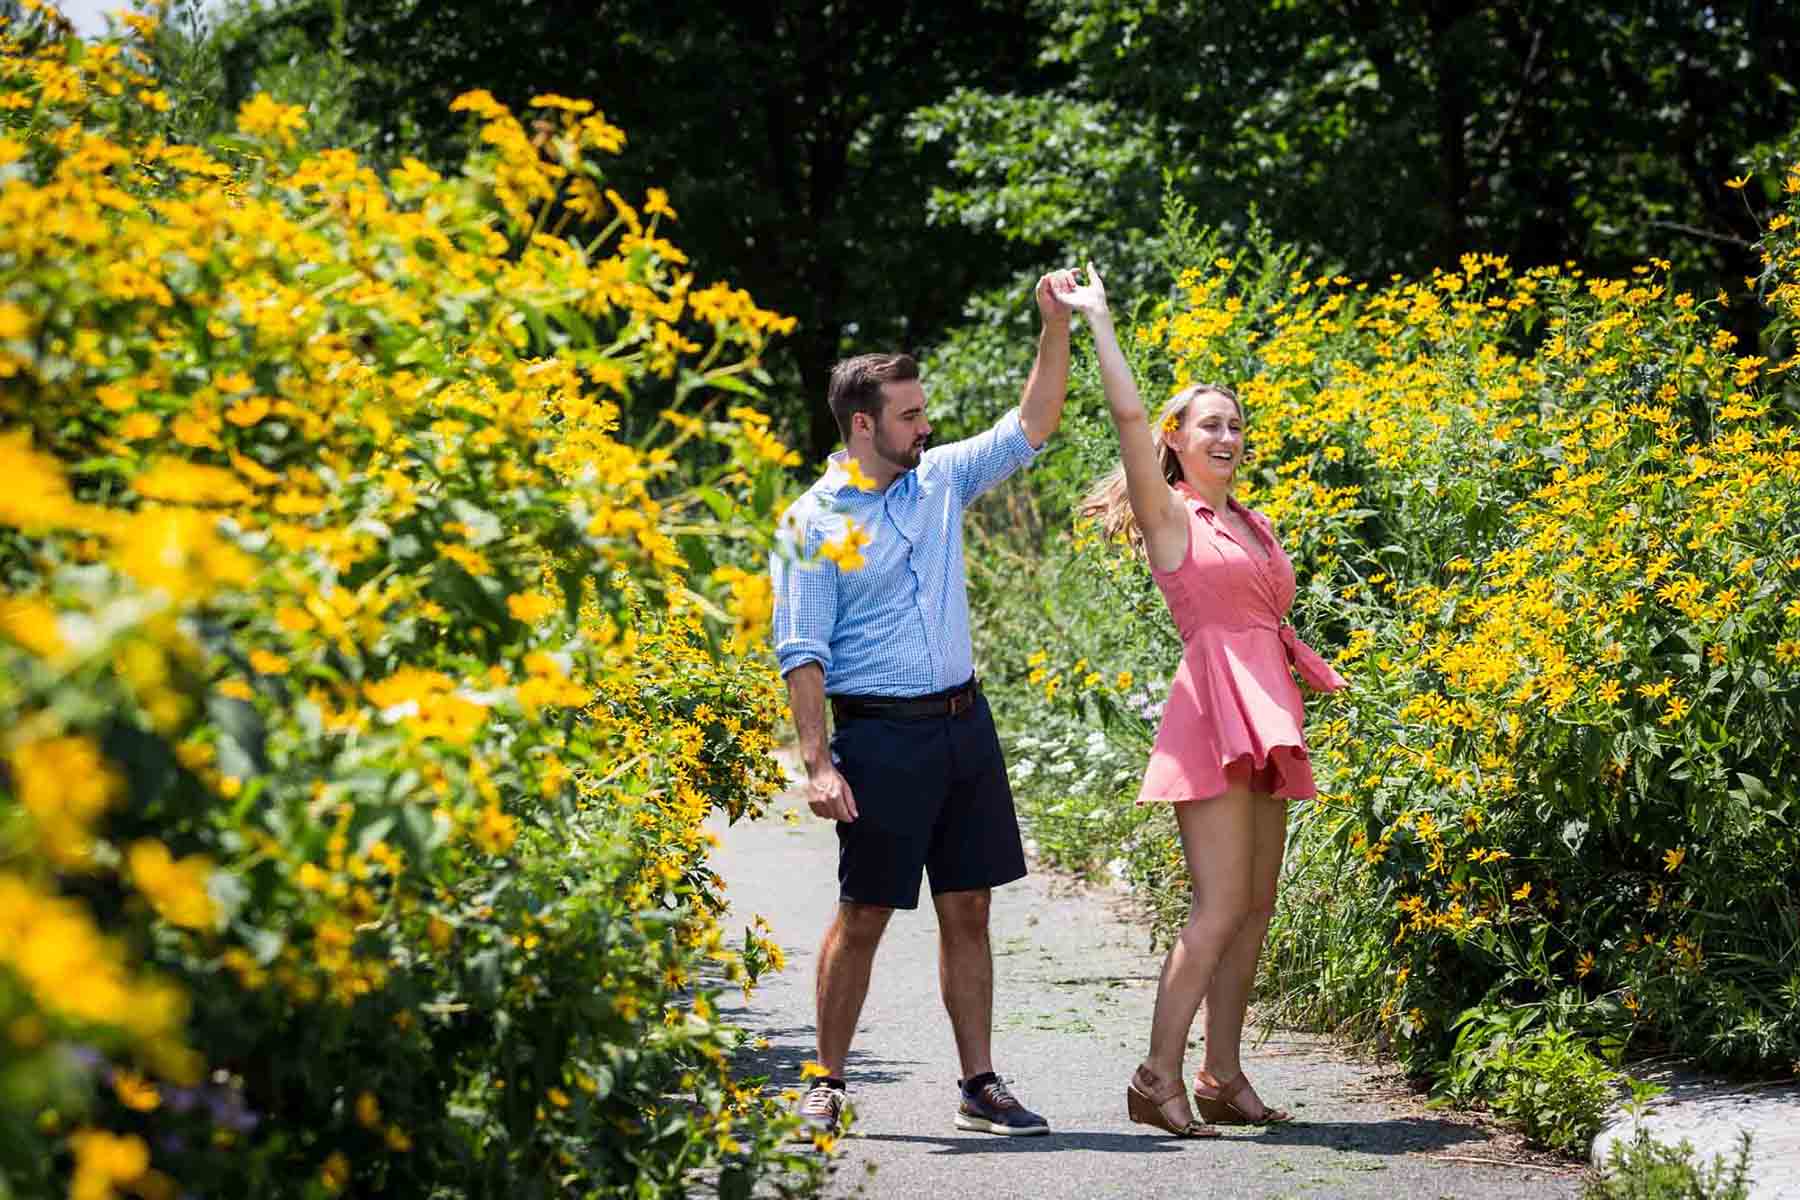 Couple dancing in front of yellow daisies